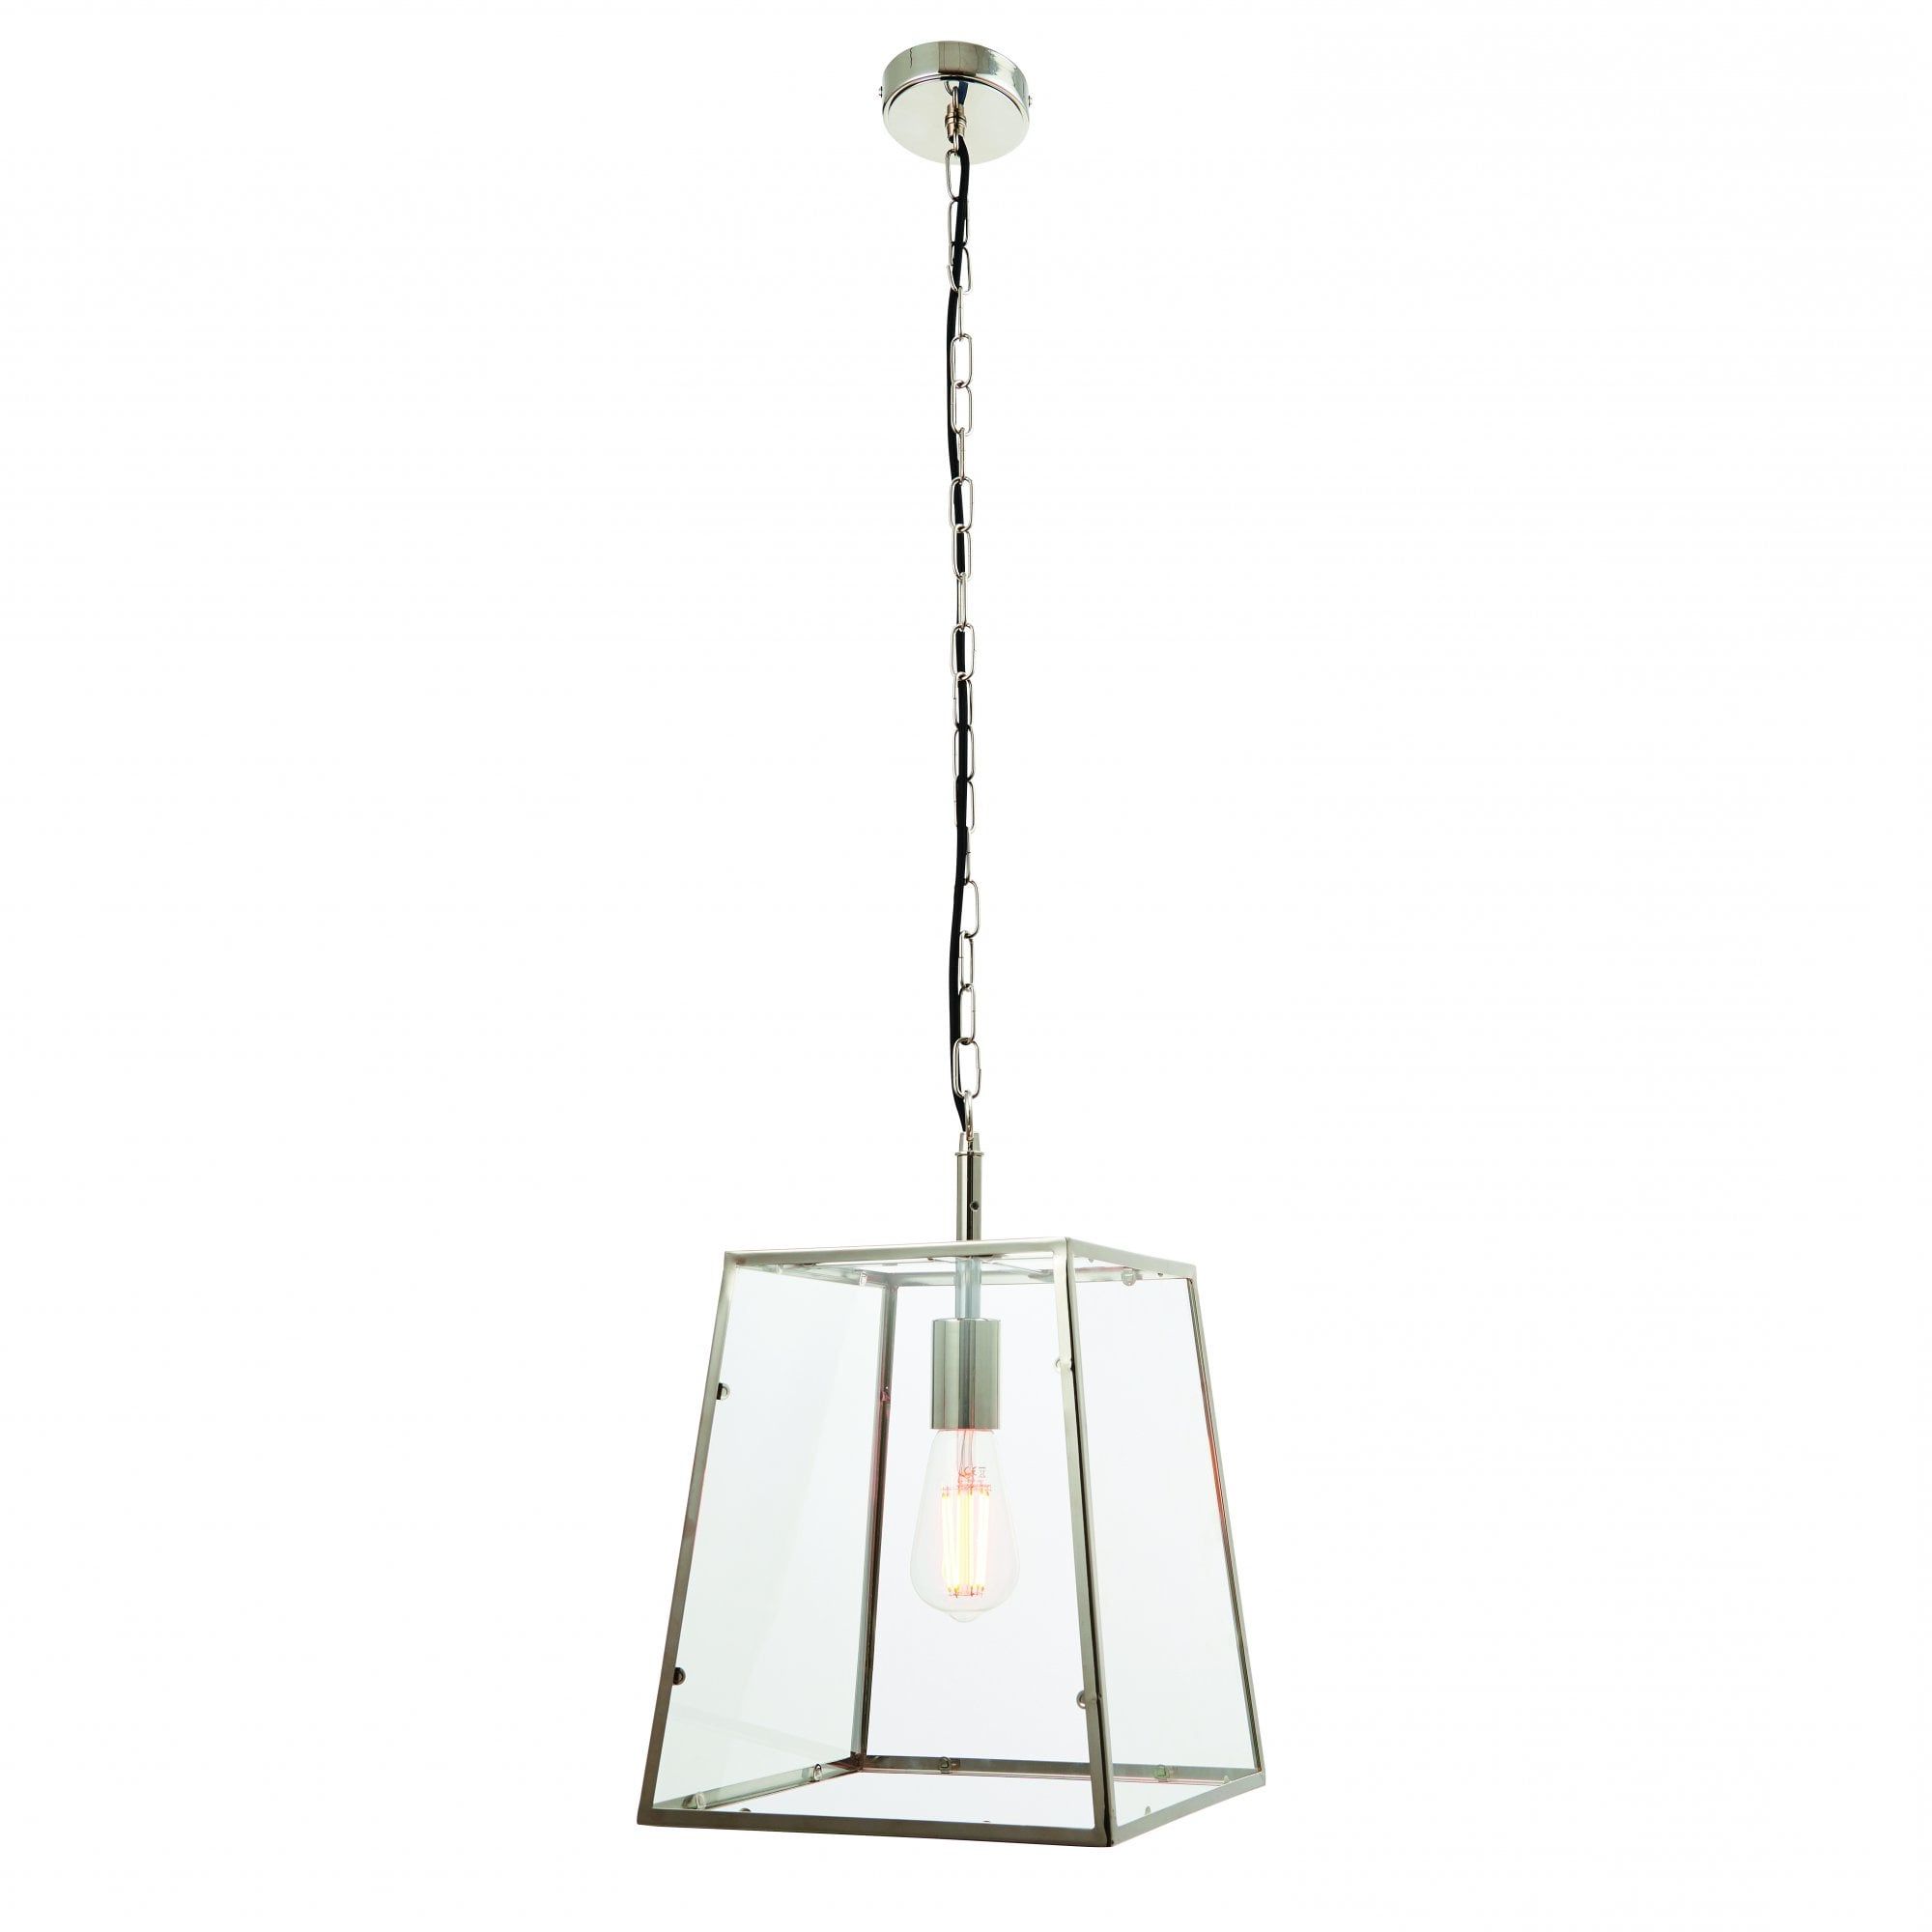 Recent Clear Glass Lantern Chandeliers With Regard To Ceiling Lantern In Polished Nickel With Clear Glass (View 5 of 10)